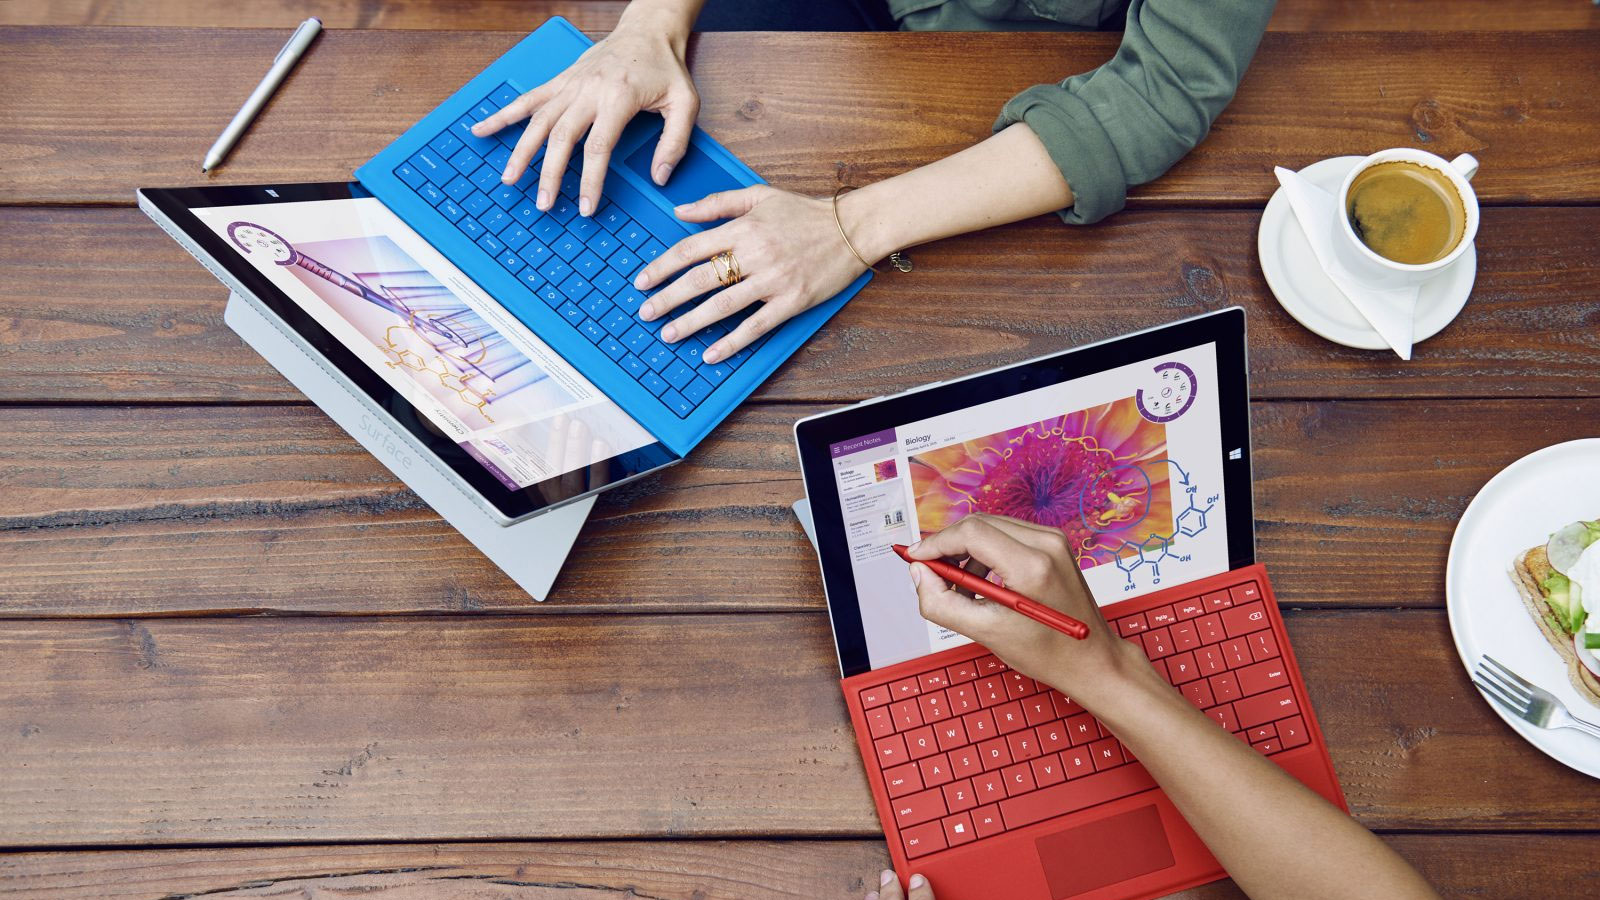 Surface tablets